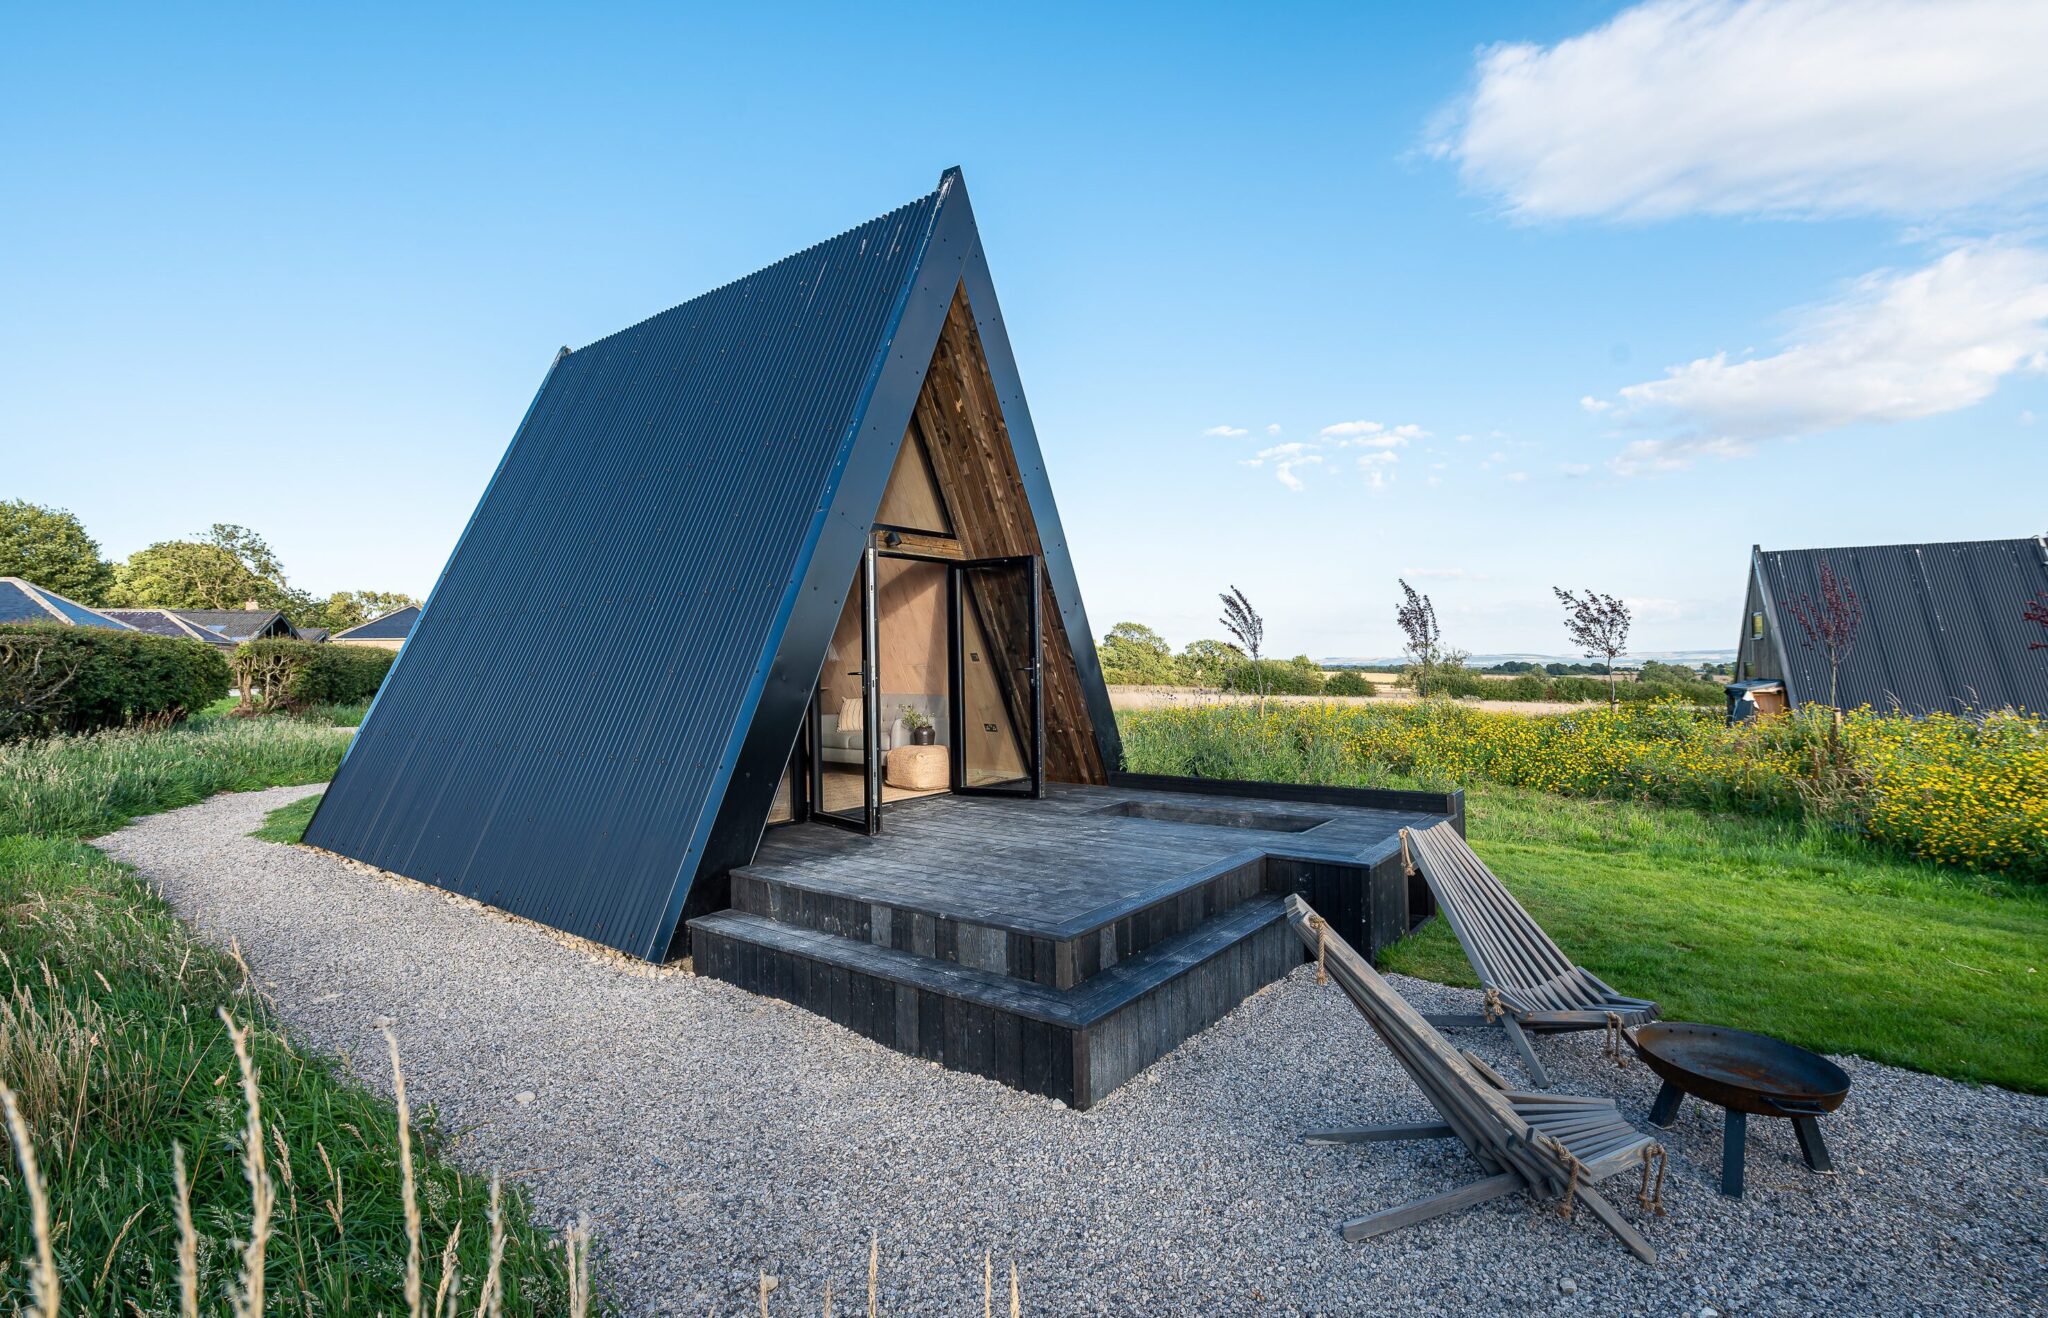 A-Frame-Cabin-design-black-cladding-_-Life-Space-Cabins-scaled-aspect-ratio-776-500